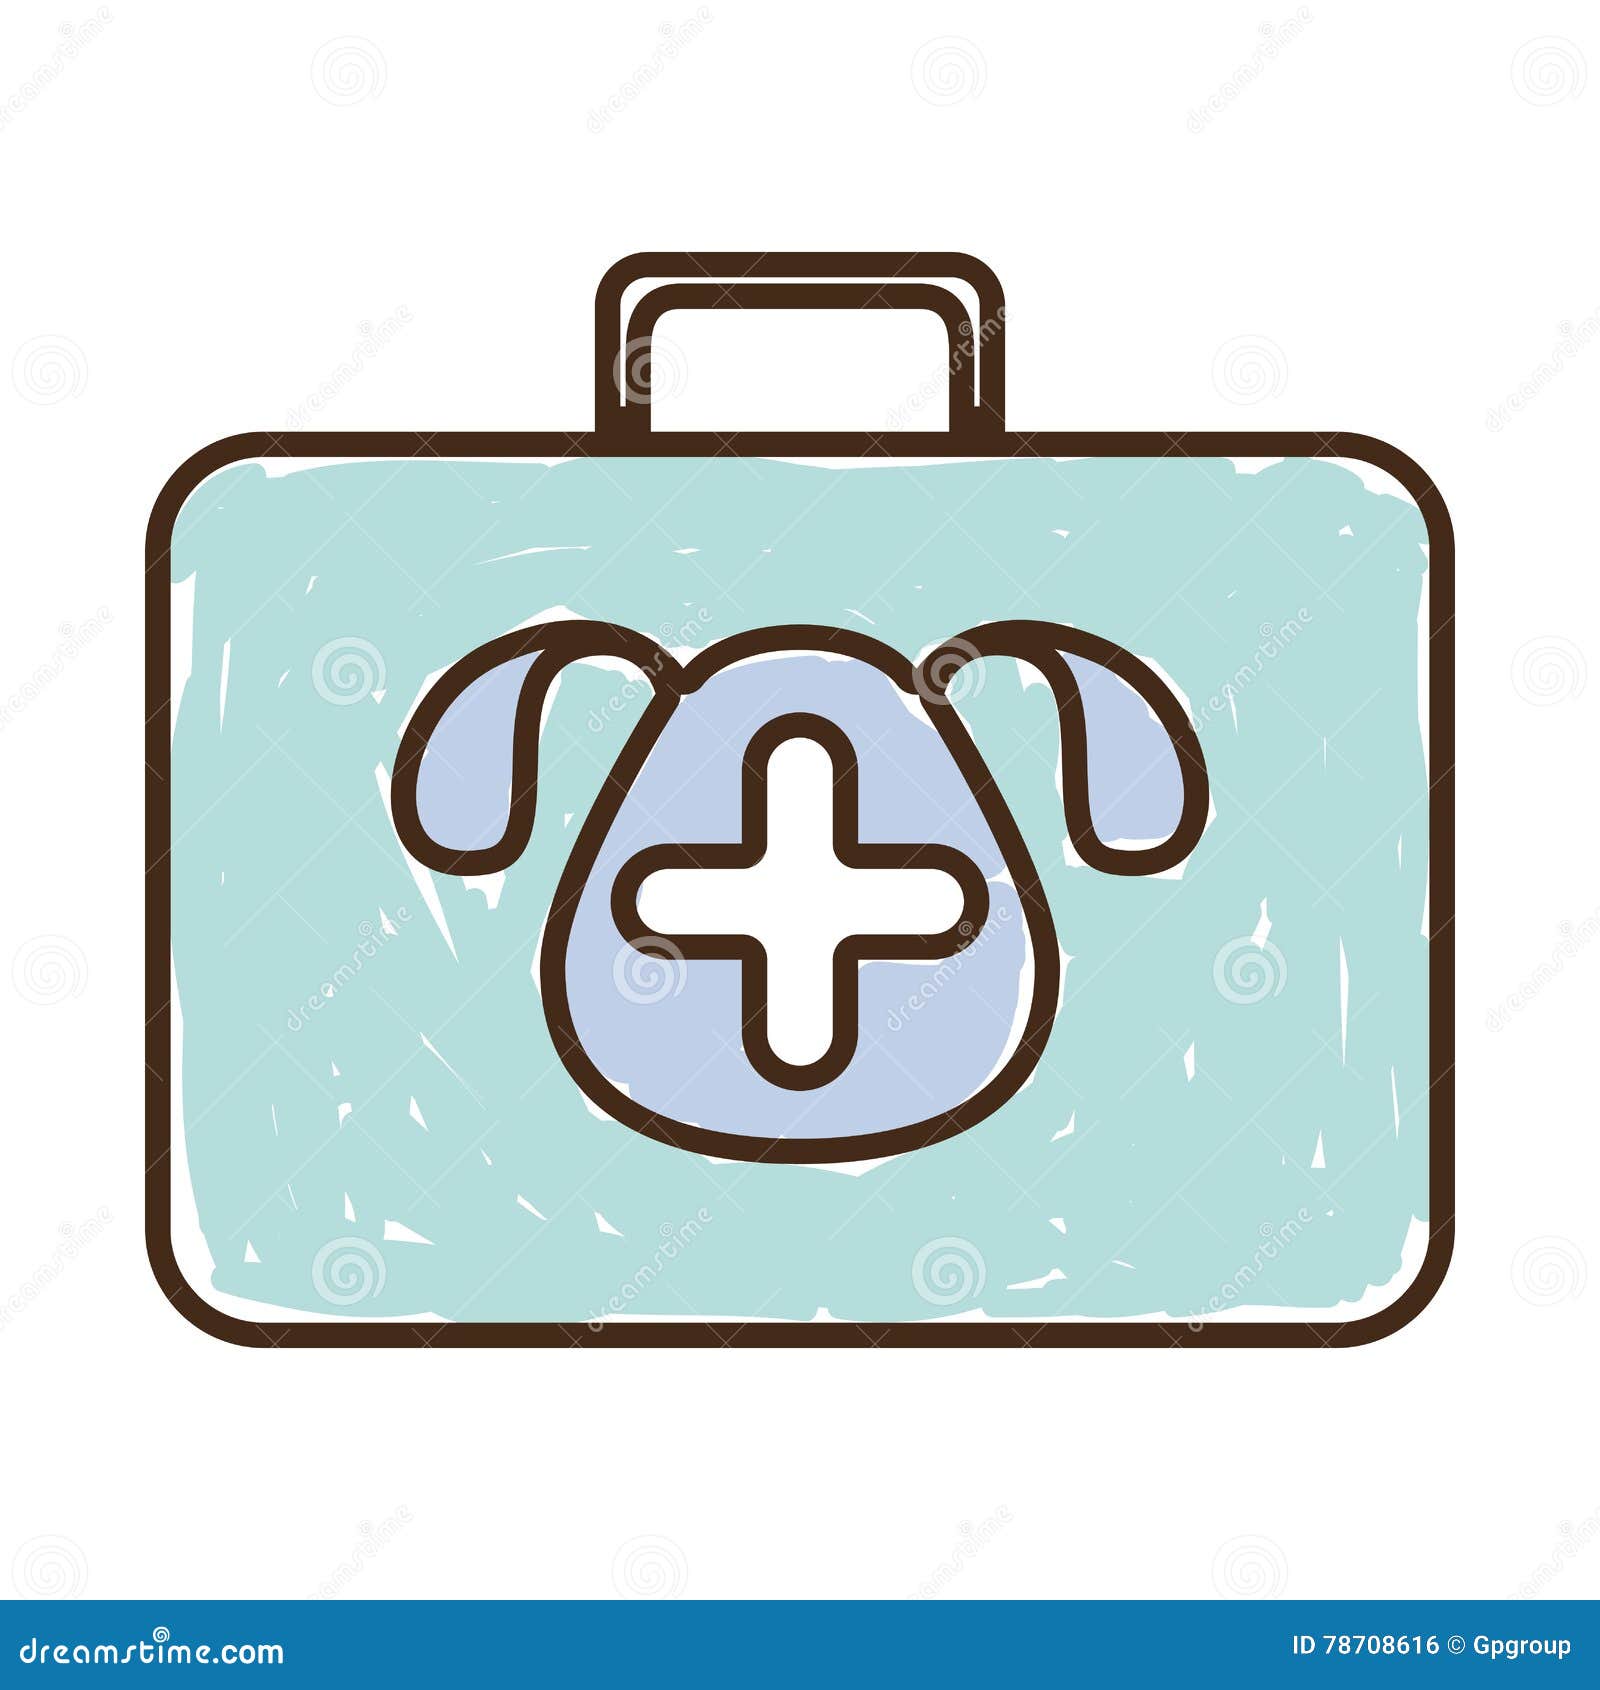 https://thumbs.dreamstime.com/z/silhouette-briefcase-first-aid-vet-color-vector-illustration-78708616.jpg